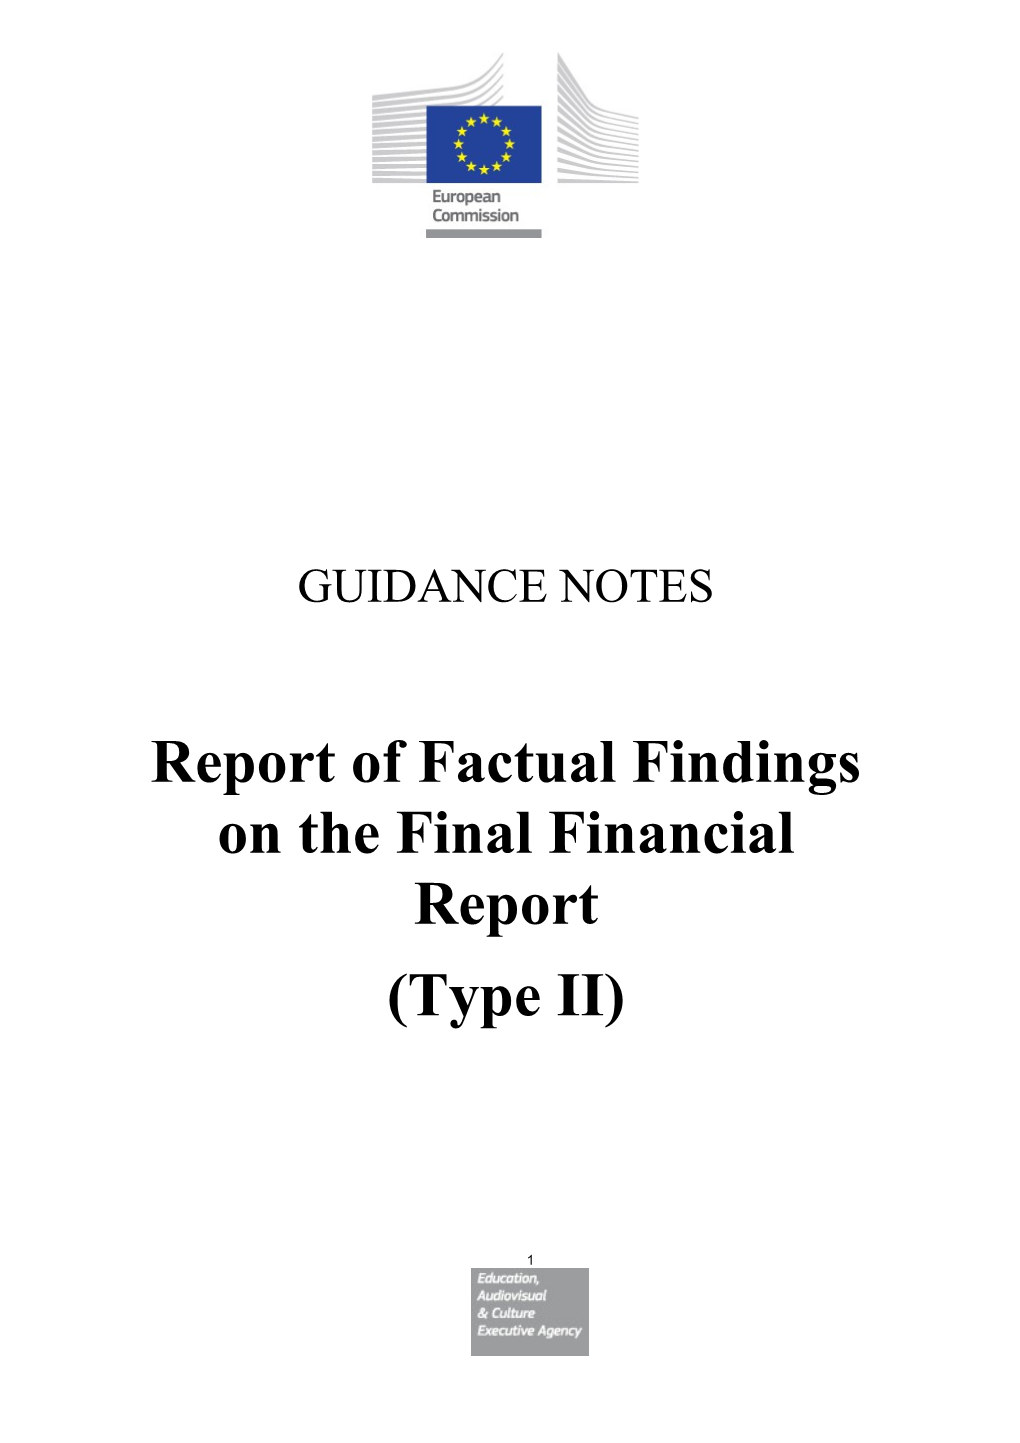 Report of Factual Findings on the Final Financial Report